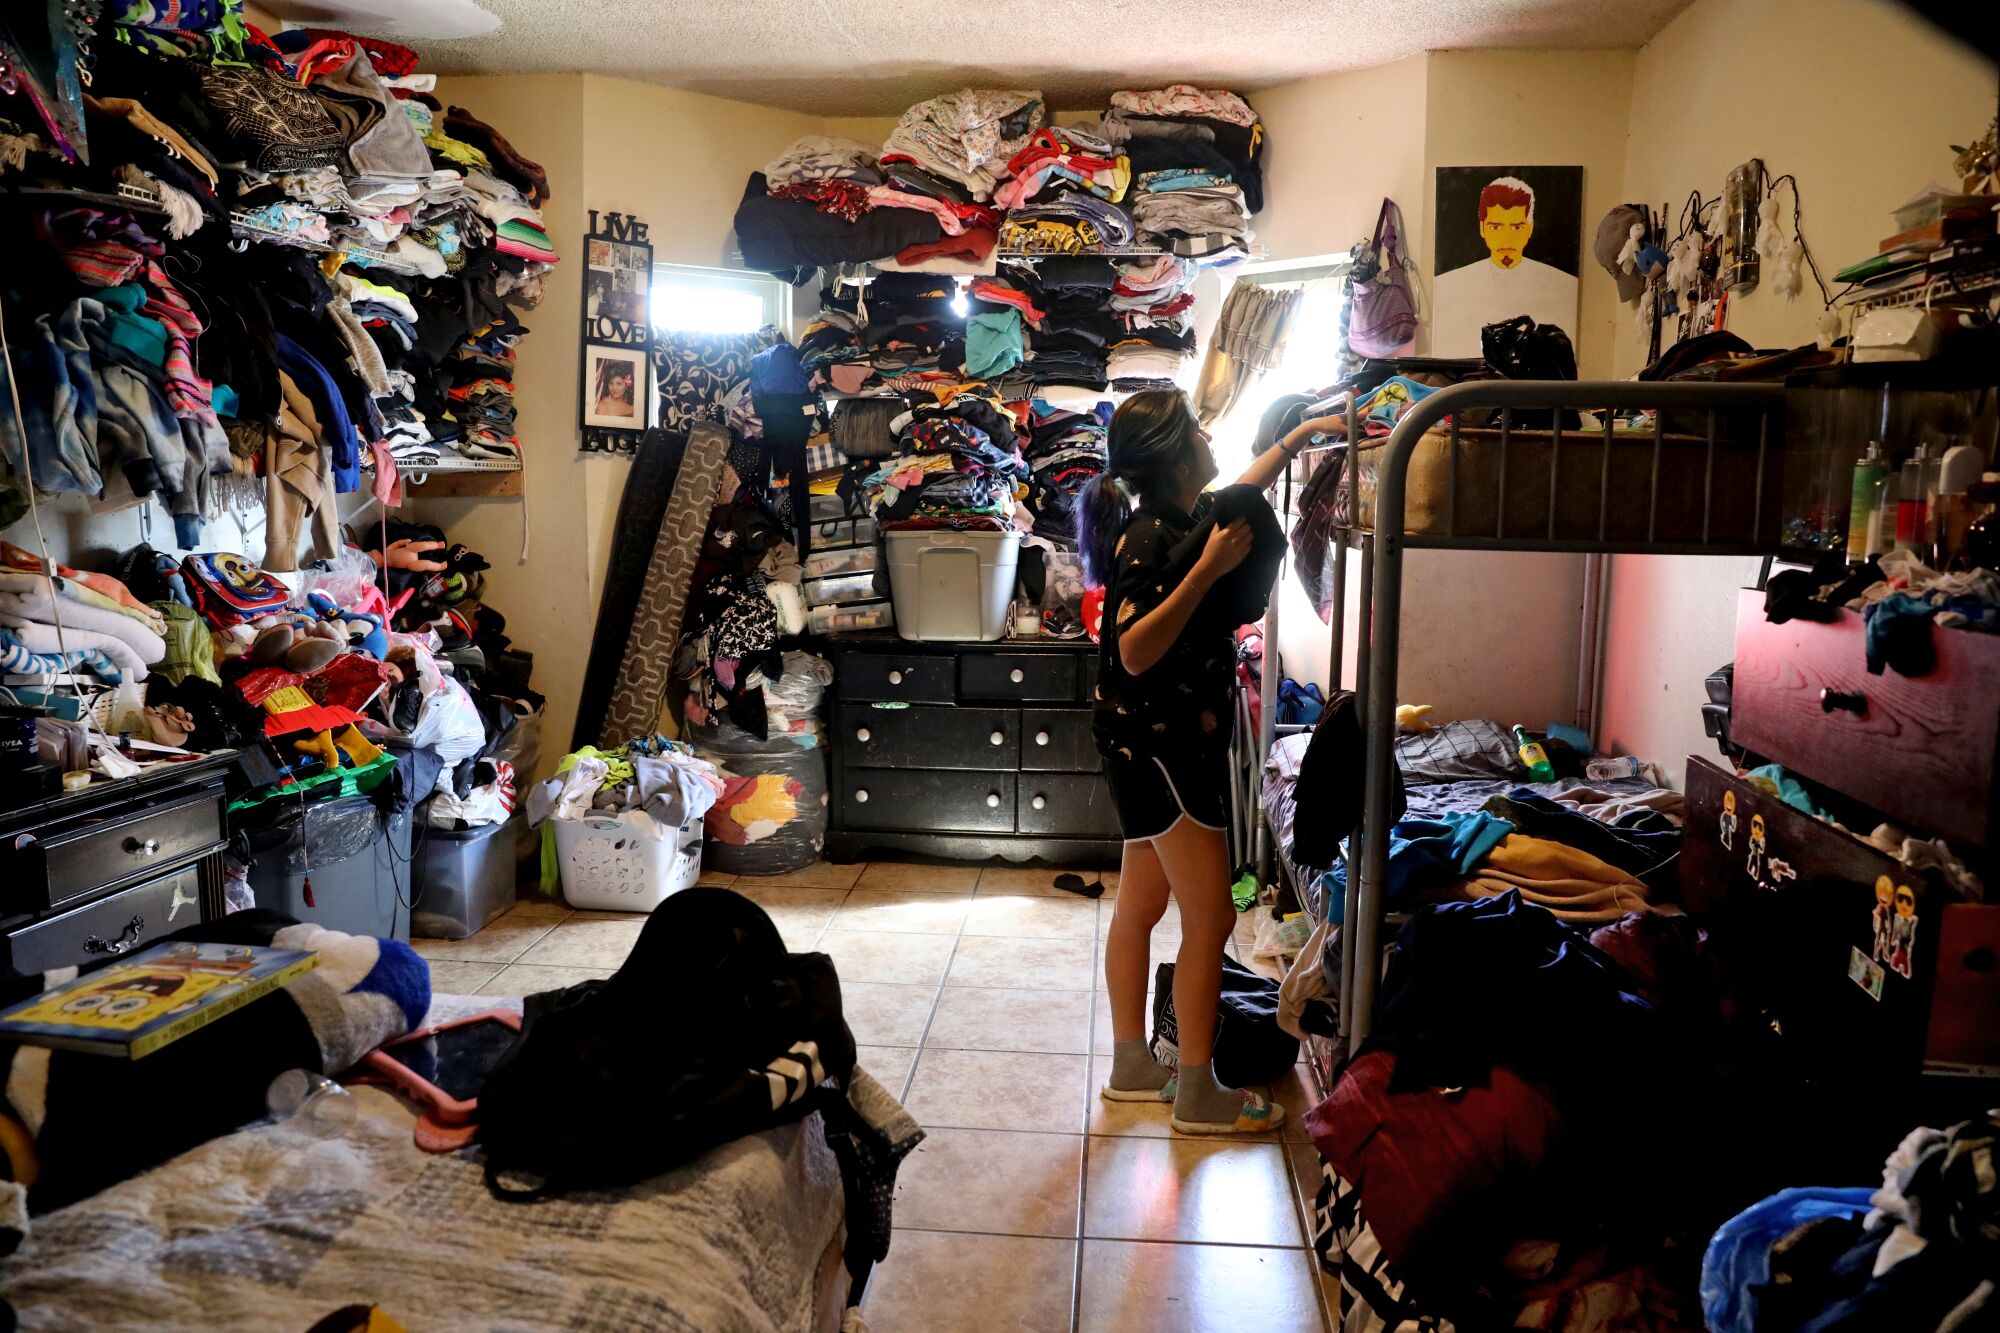 Angie Davila in the family's one-bedroom apartment in the Pico-Union neighborhood of Los Angeles.